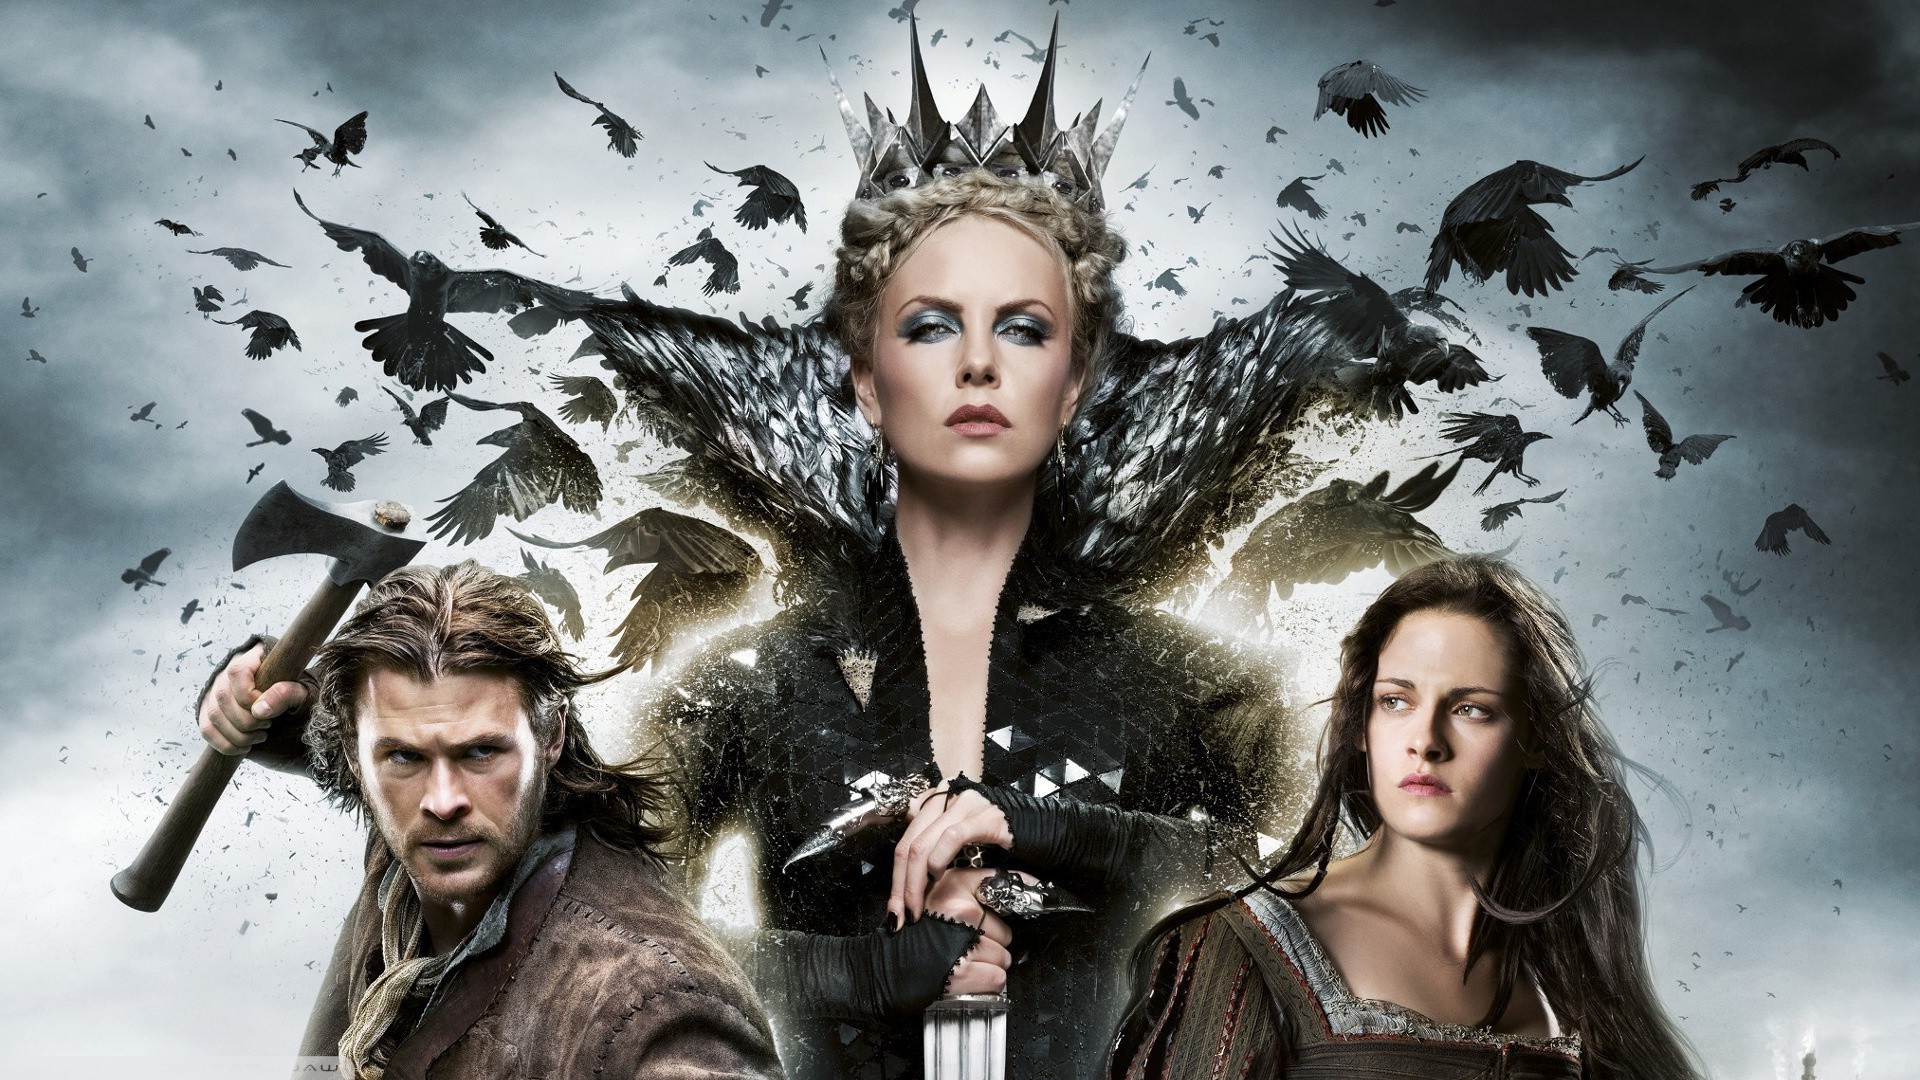 Snow White And The Huntsman, Movies, Kristen Stewart, Charlize Theron